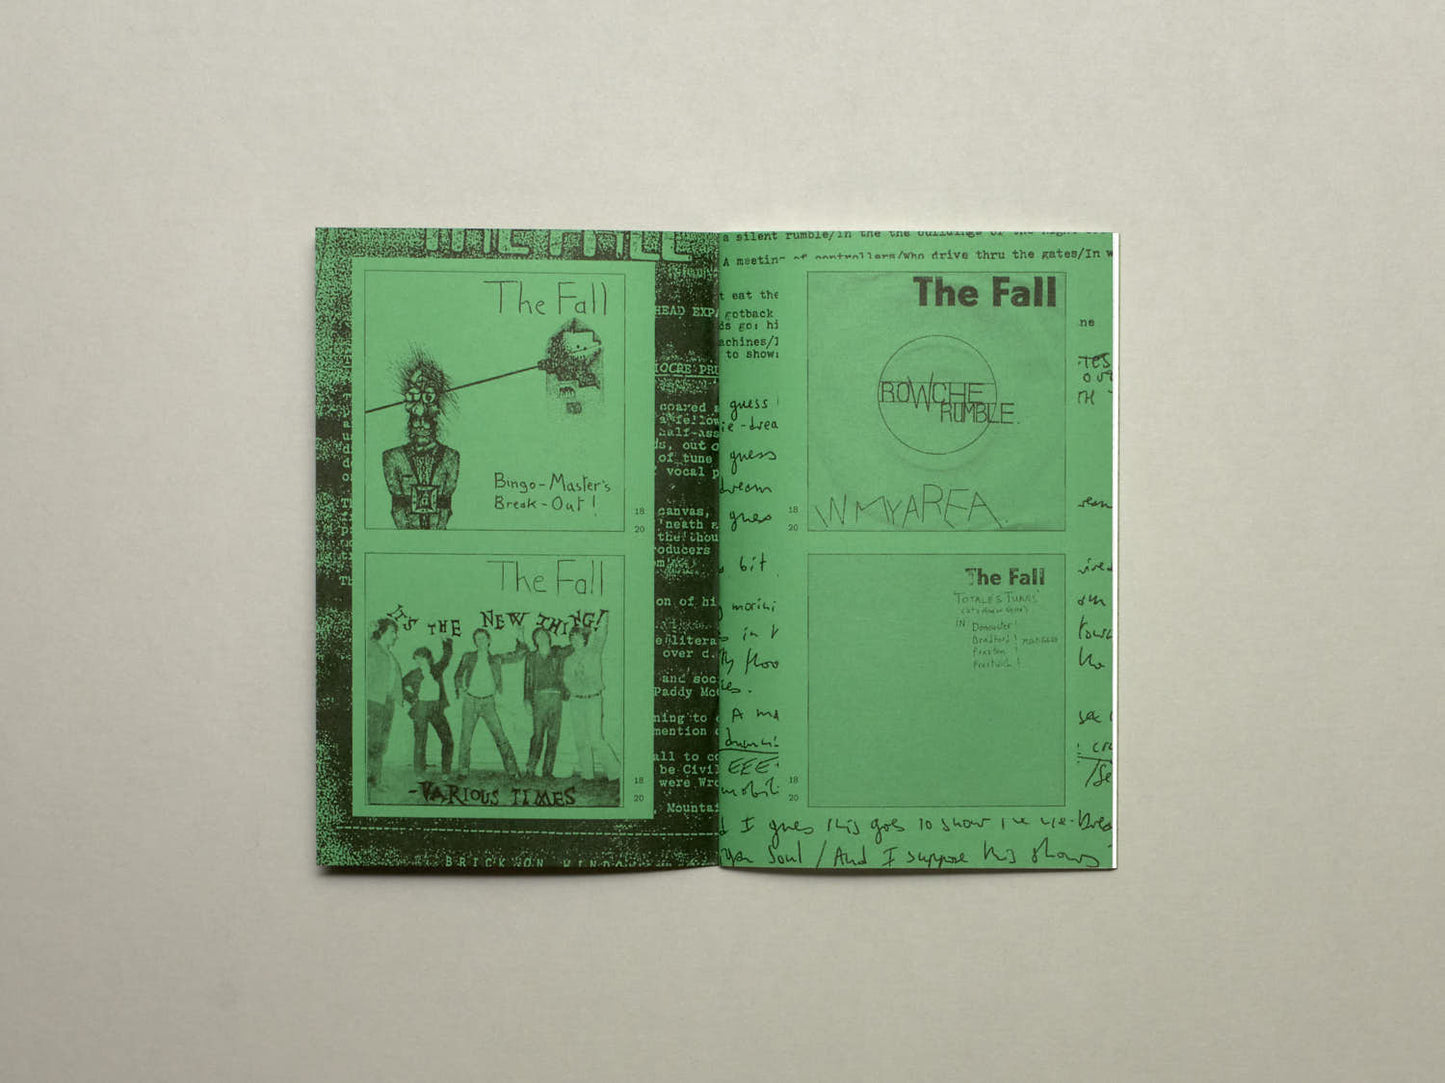 Paul Wilson, Language Scraps 02 - Mark E. Smith’s Handwriting and the Typography of The Fall